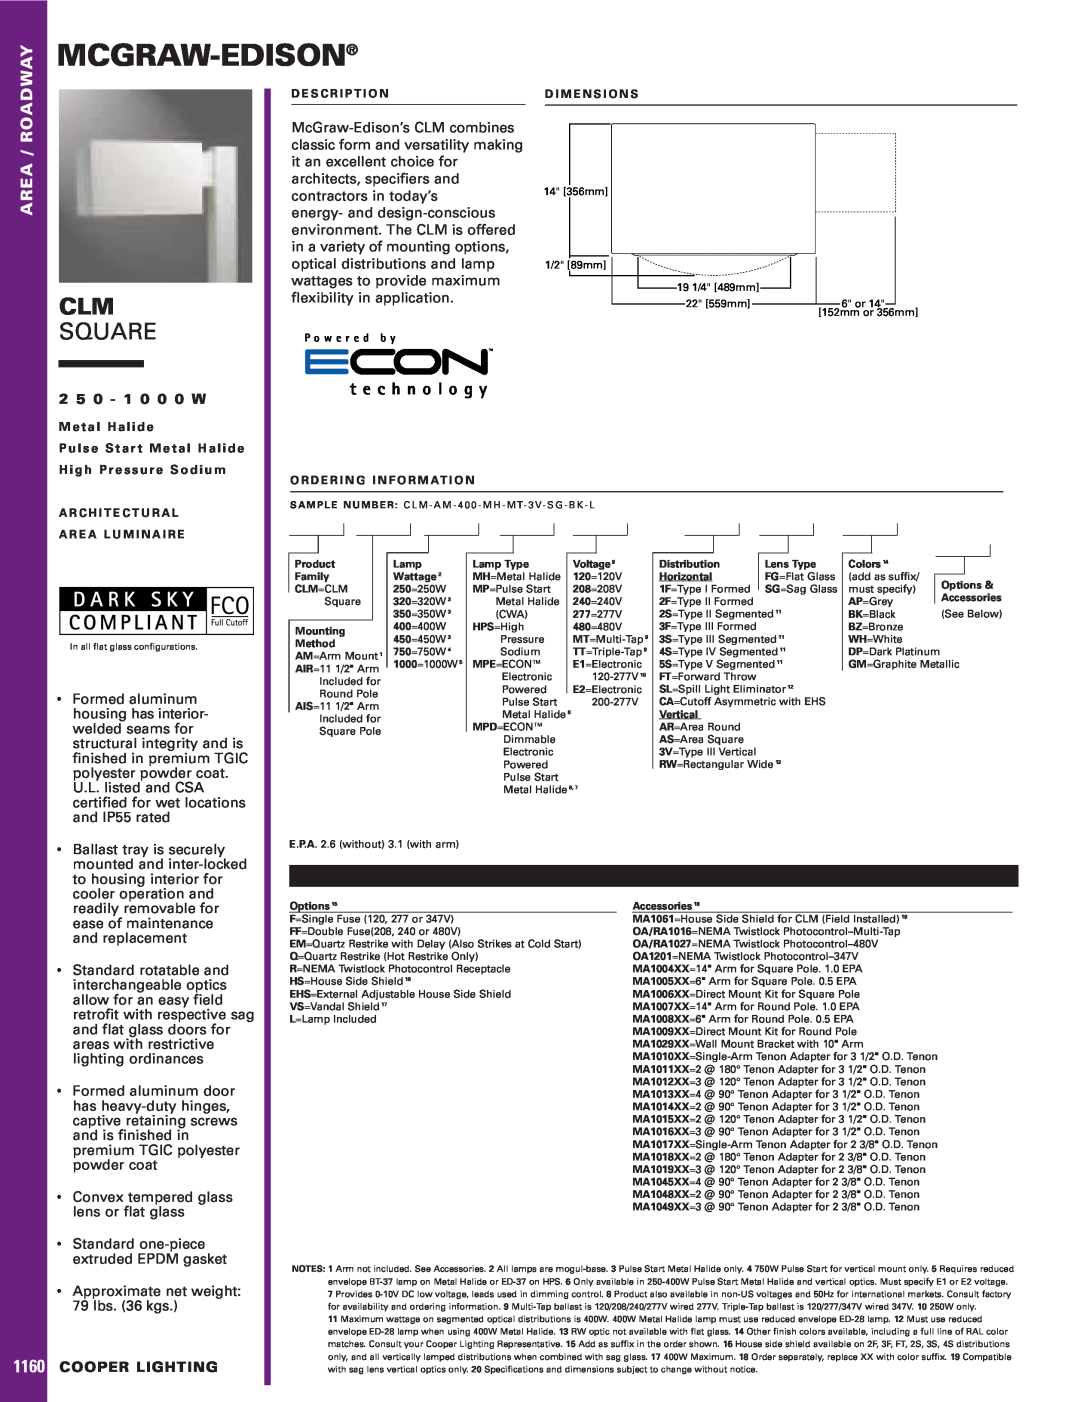 Cooper Lighting CLM Square specifications Mcgraw-Edison, t e c h n o l o g y, 1160, Roadway, Area, 2 5 0 - 1 0 0 0 W 